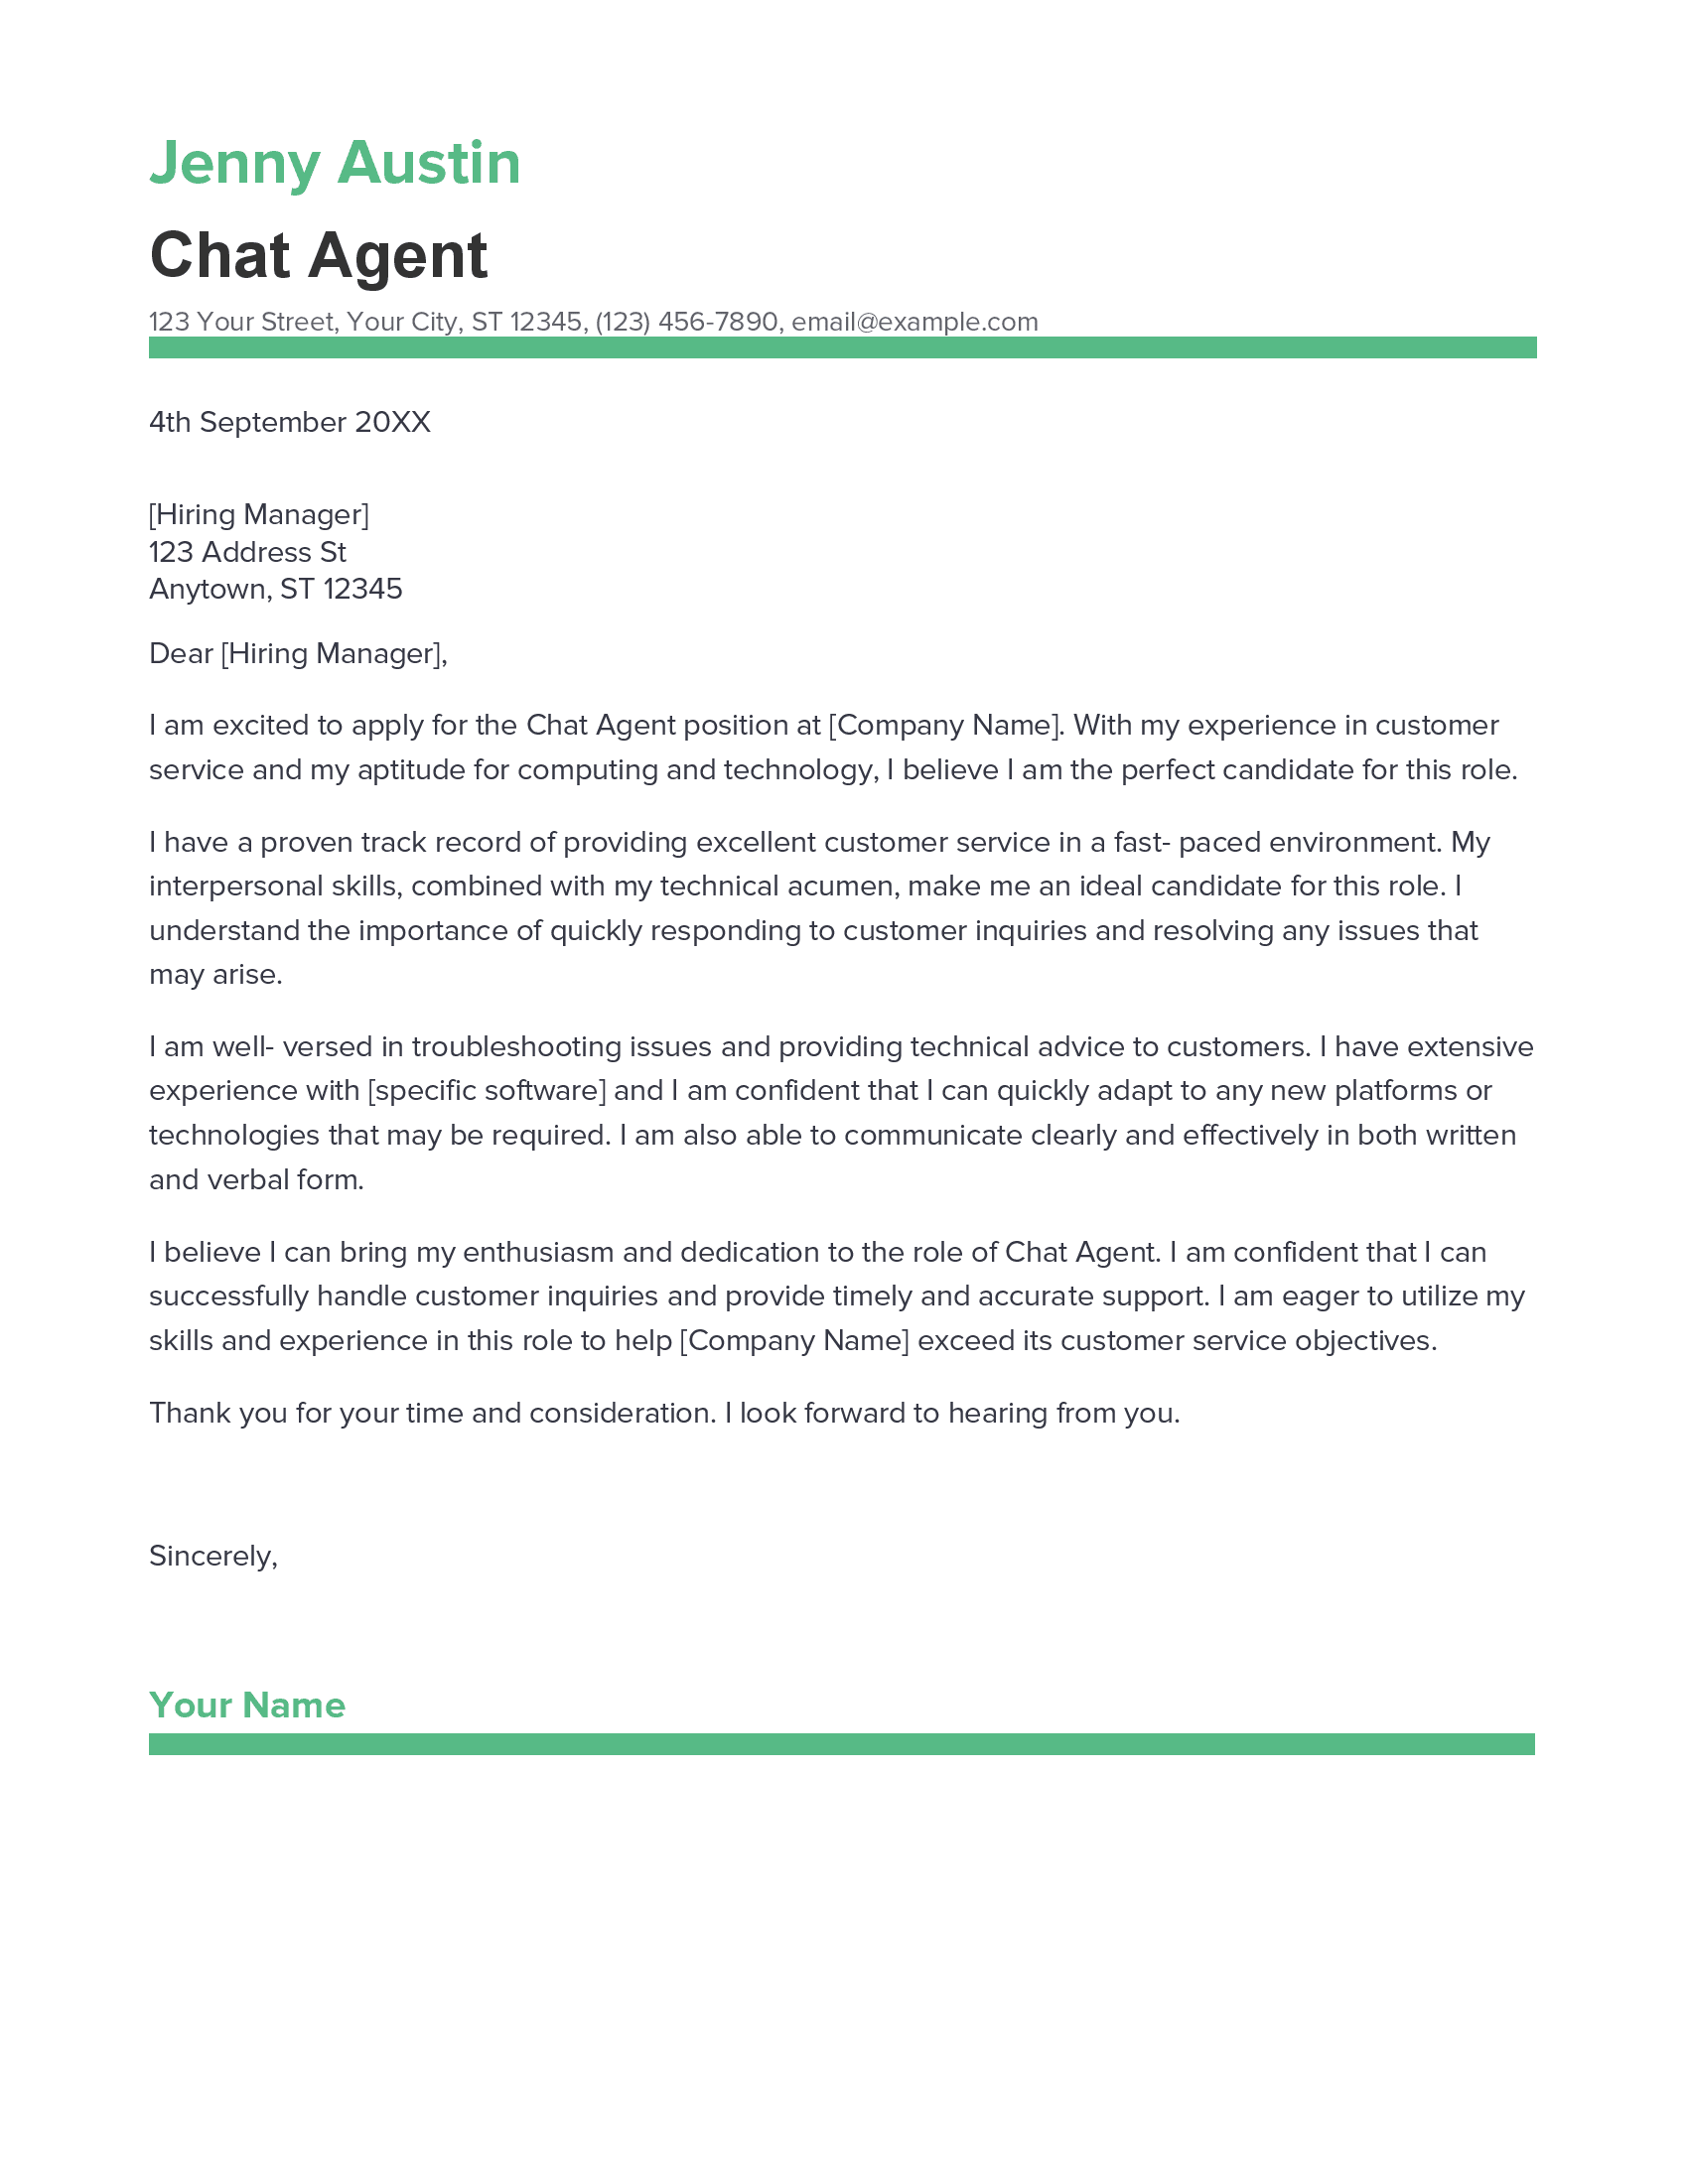 live chat agent cover letter